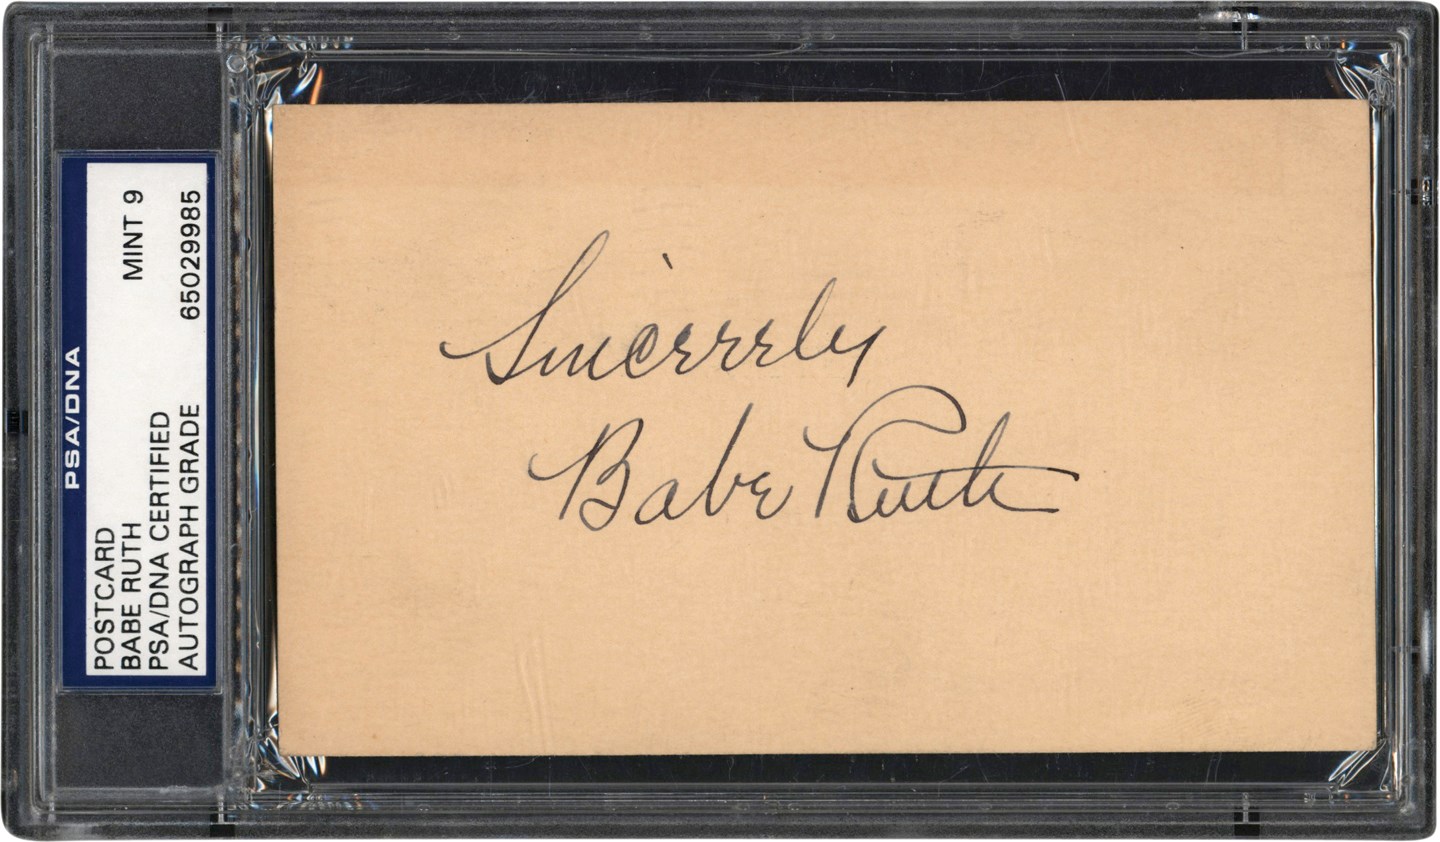 - 1937 Babe Ruth Signed Government Postcard (PSA MINT 9)